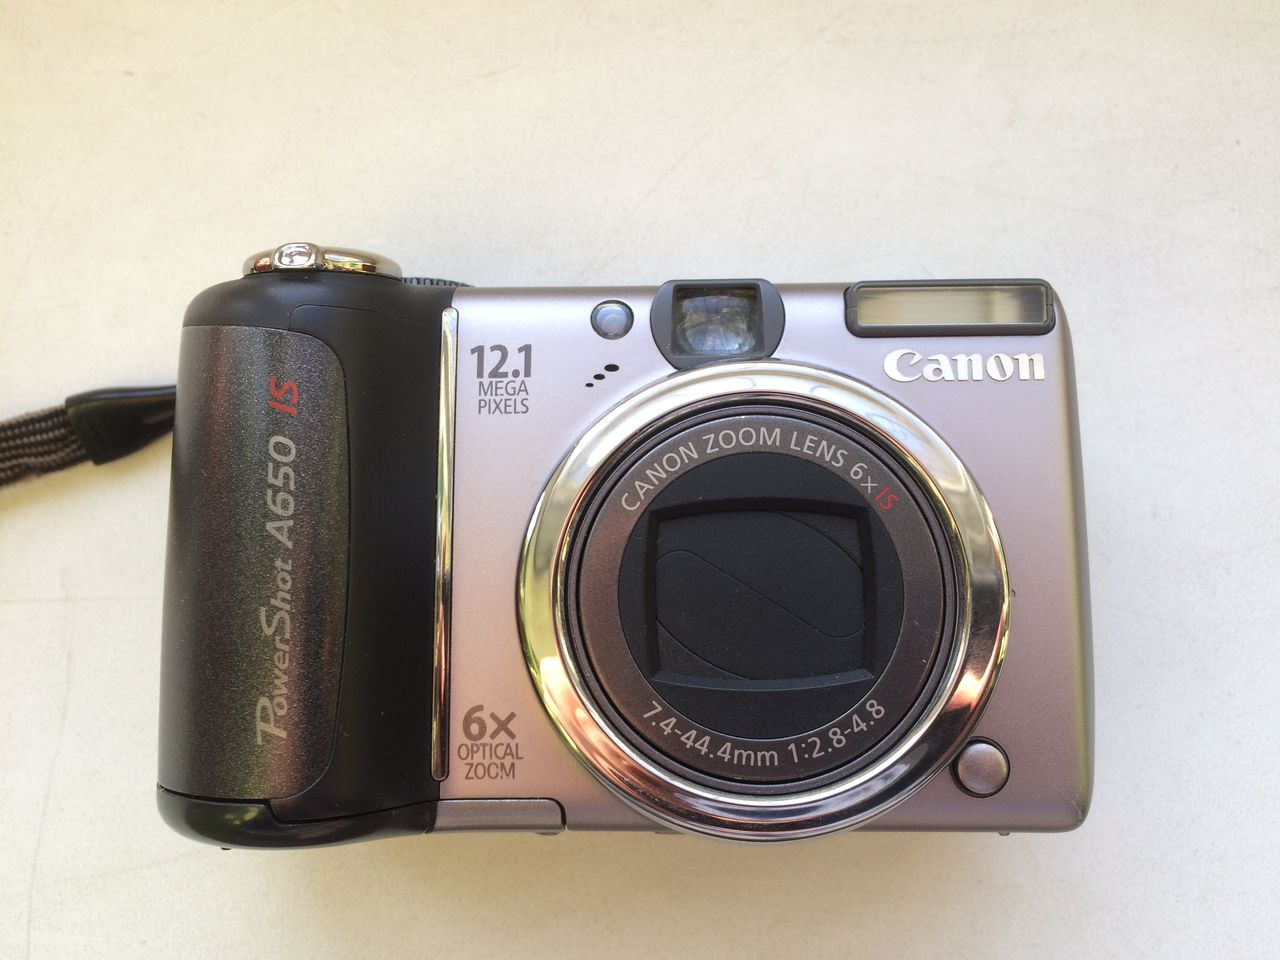 Canon Powershot A650 IS Digital Camera Review